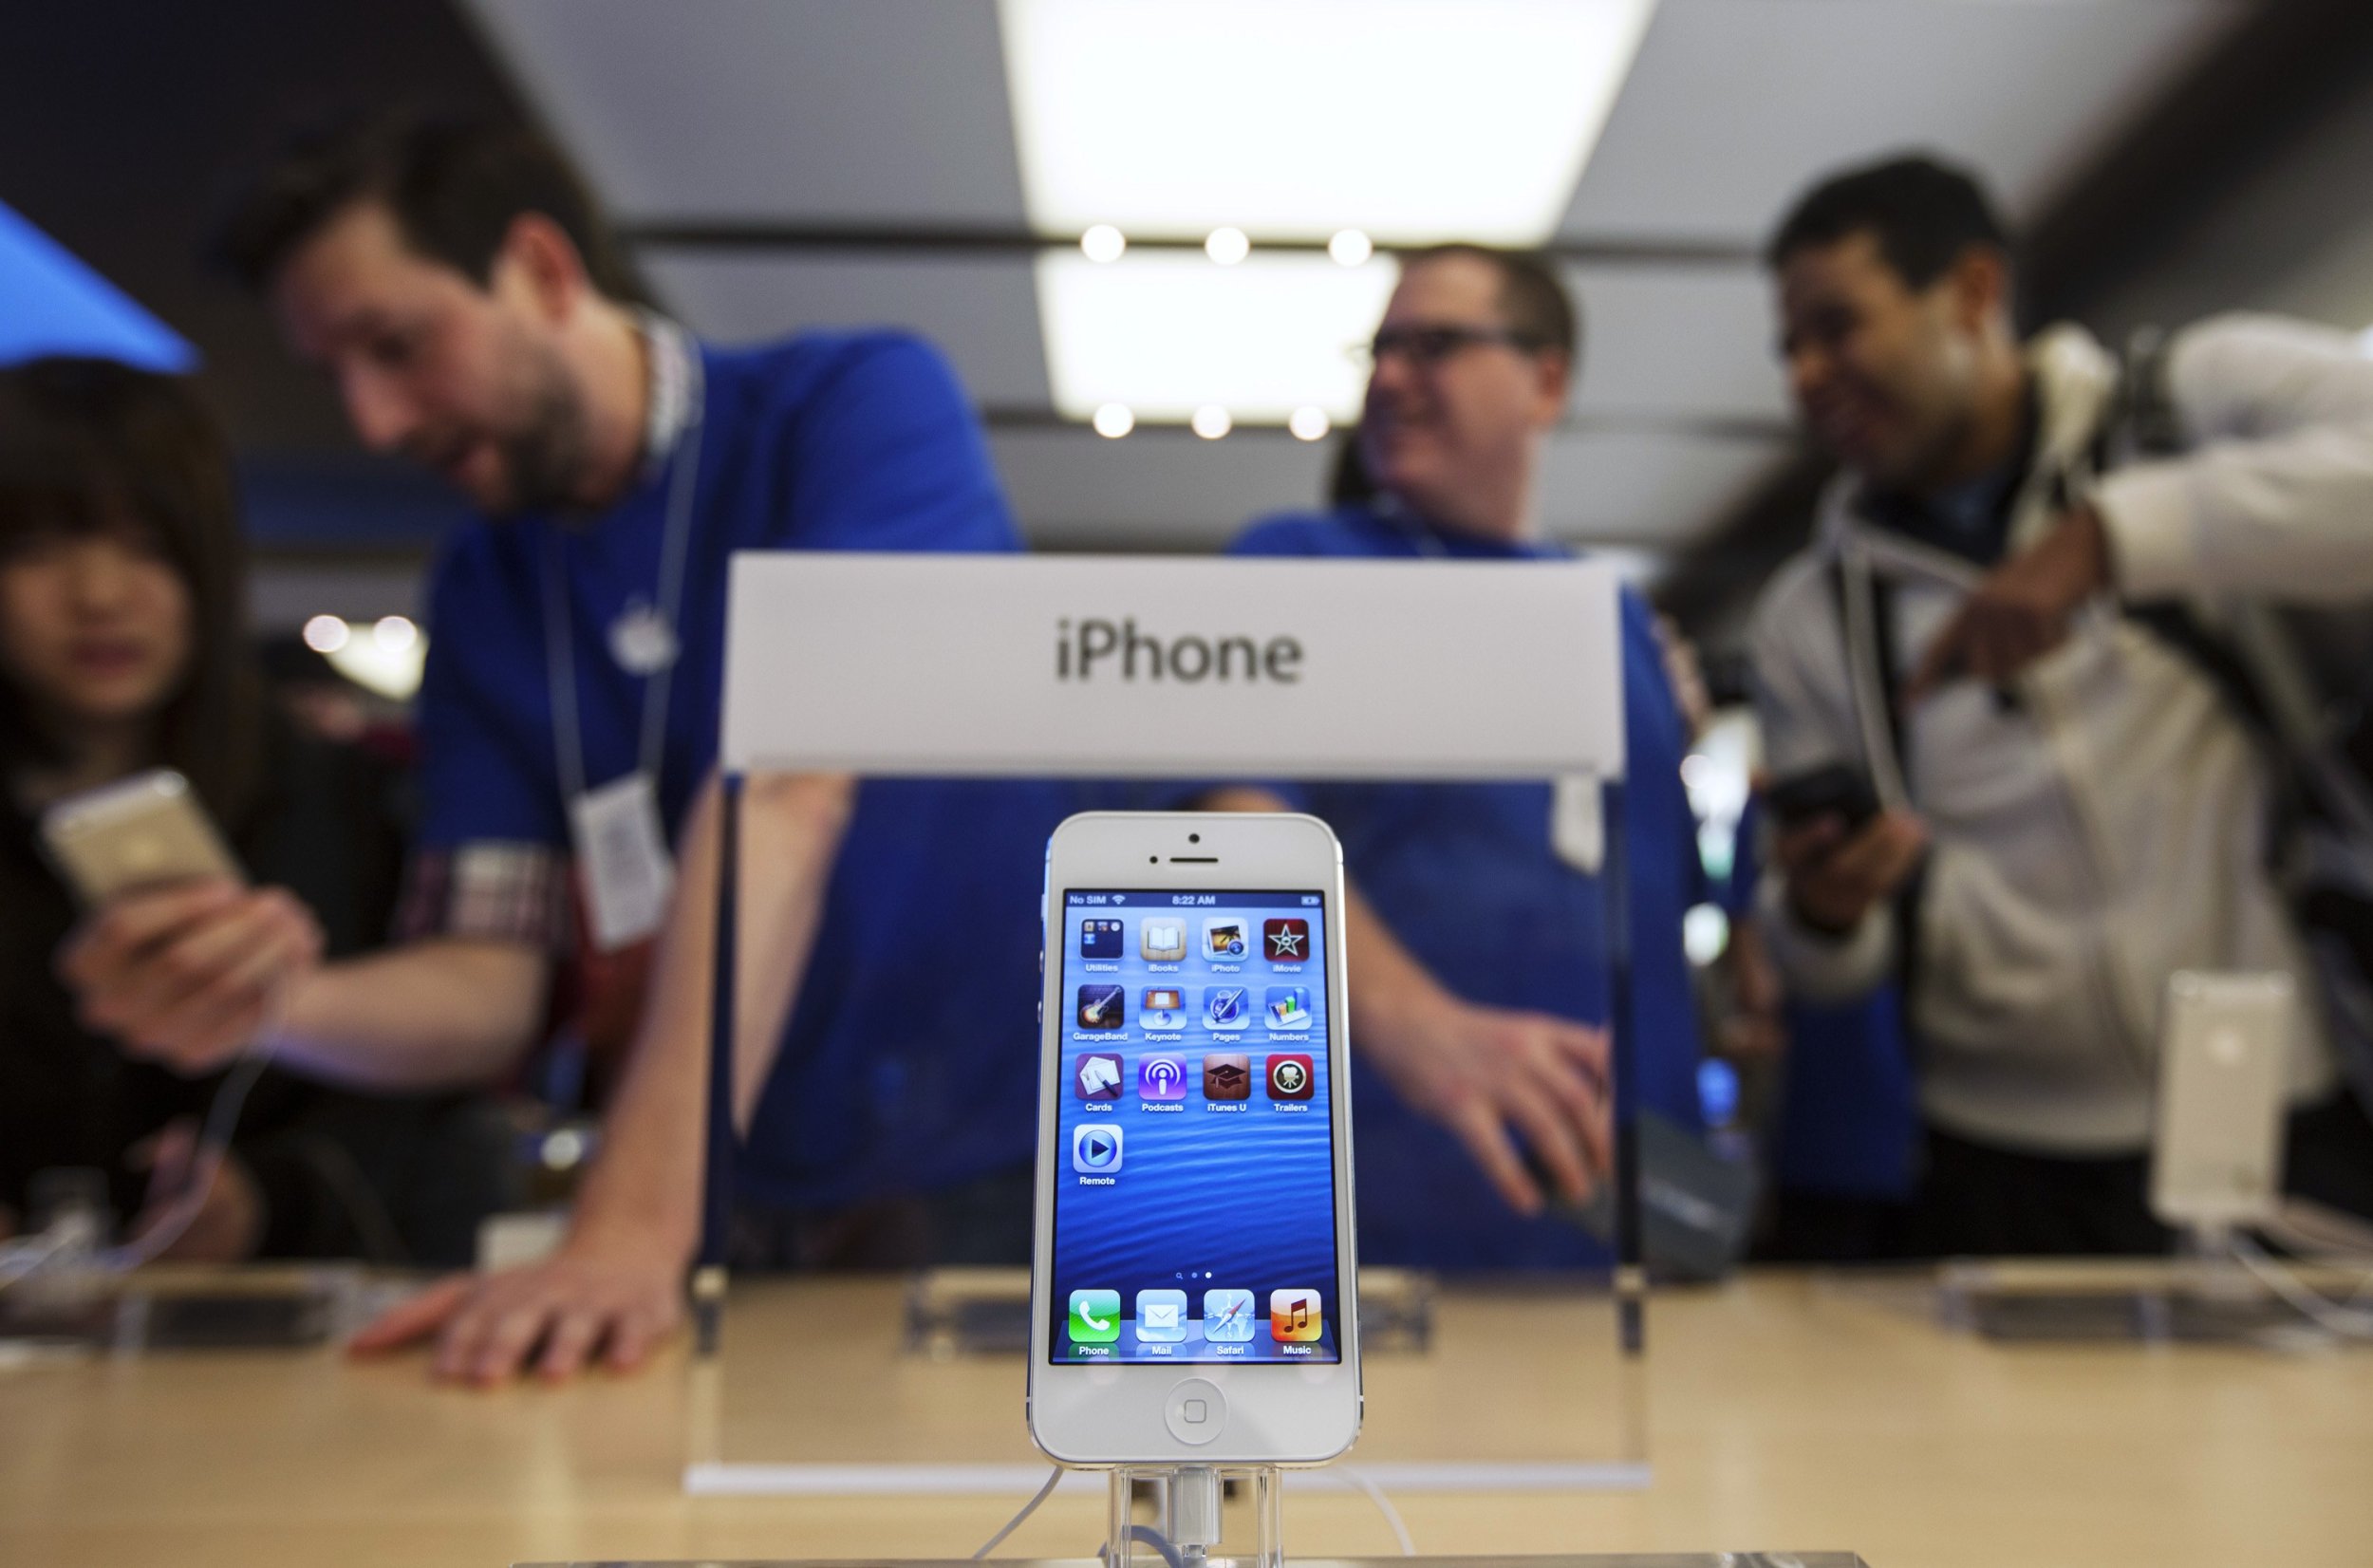 Apple Iphone 5s Release Date Tipped For June With 128gb Storage 6 8